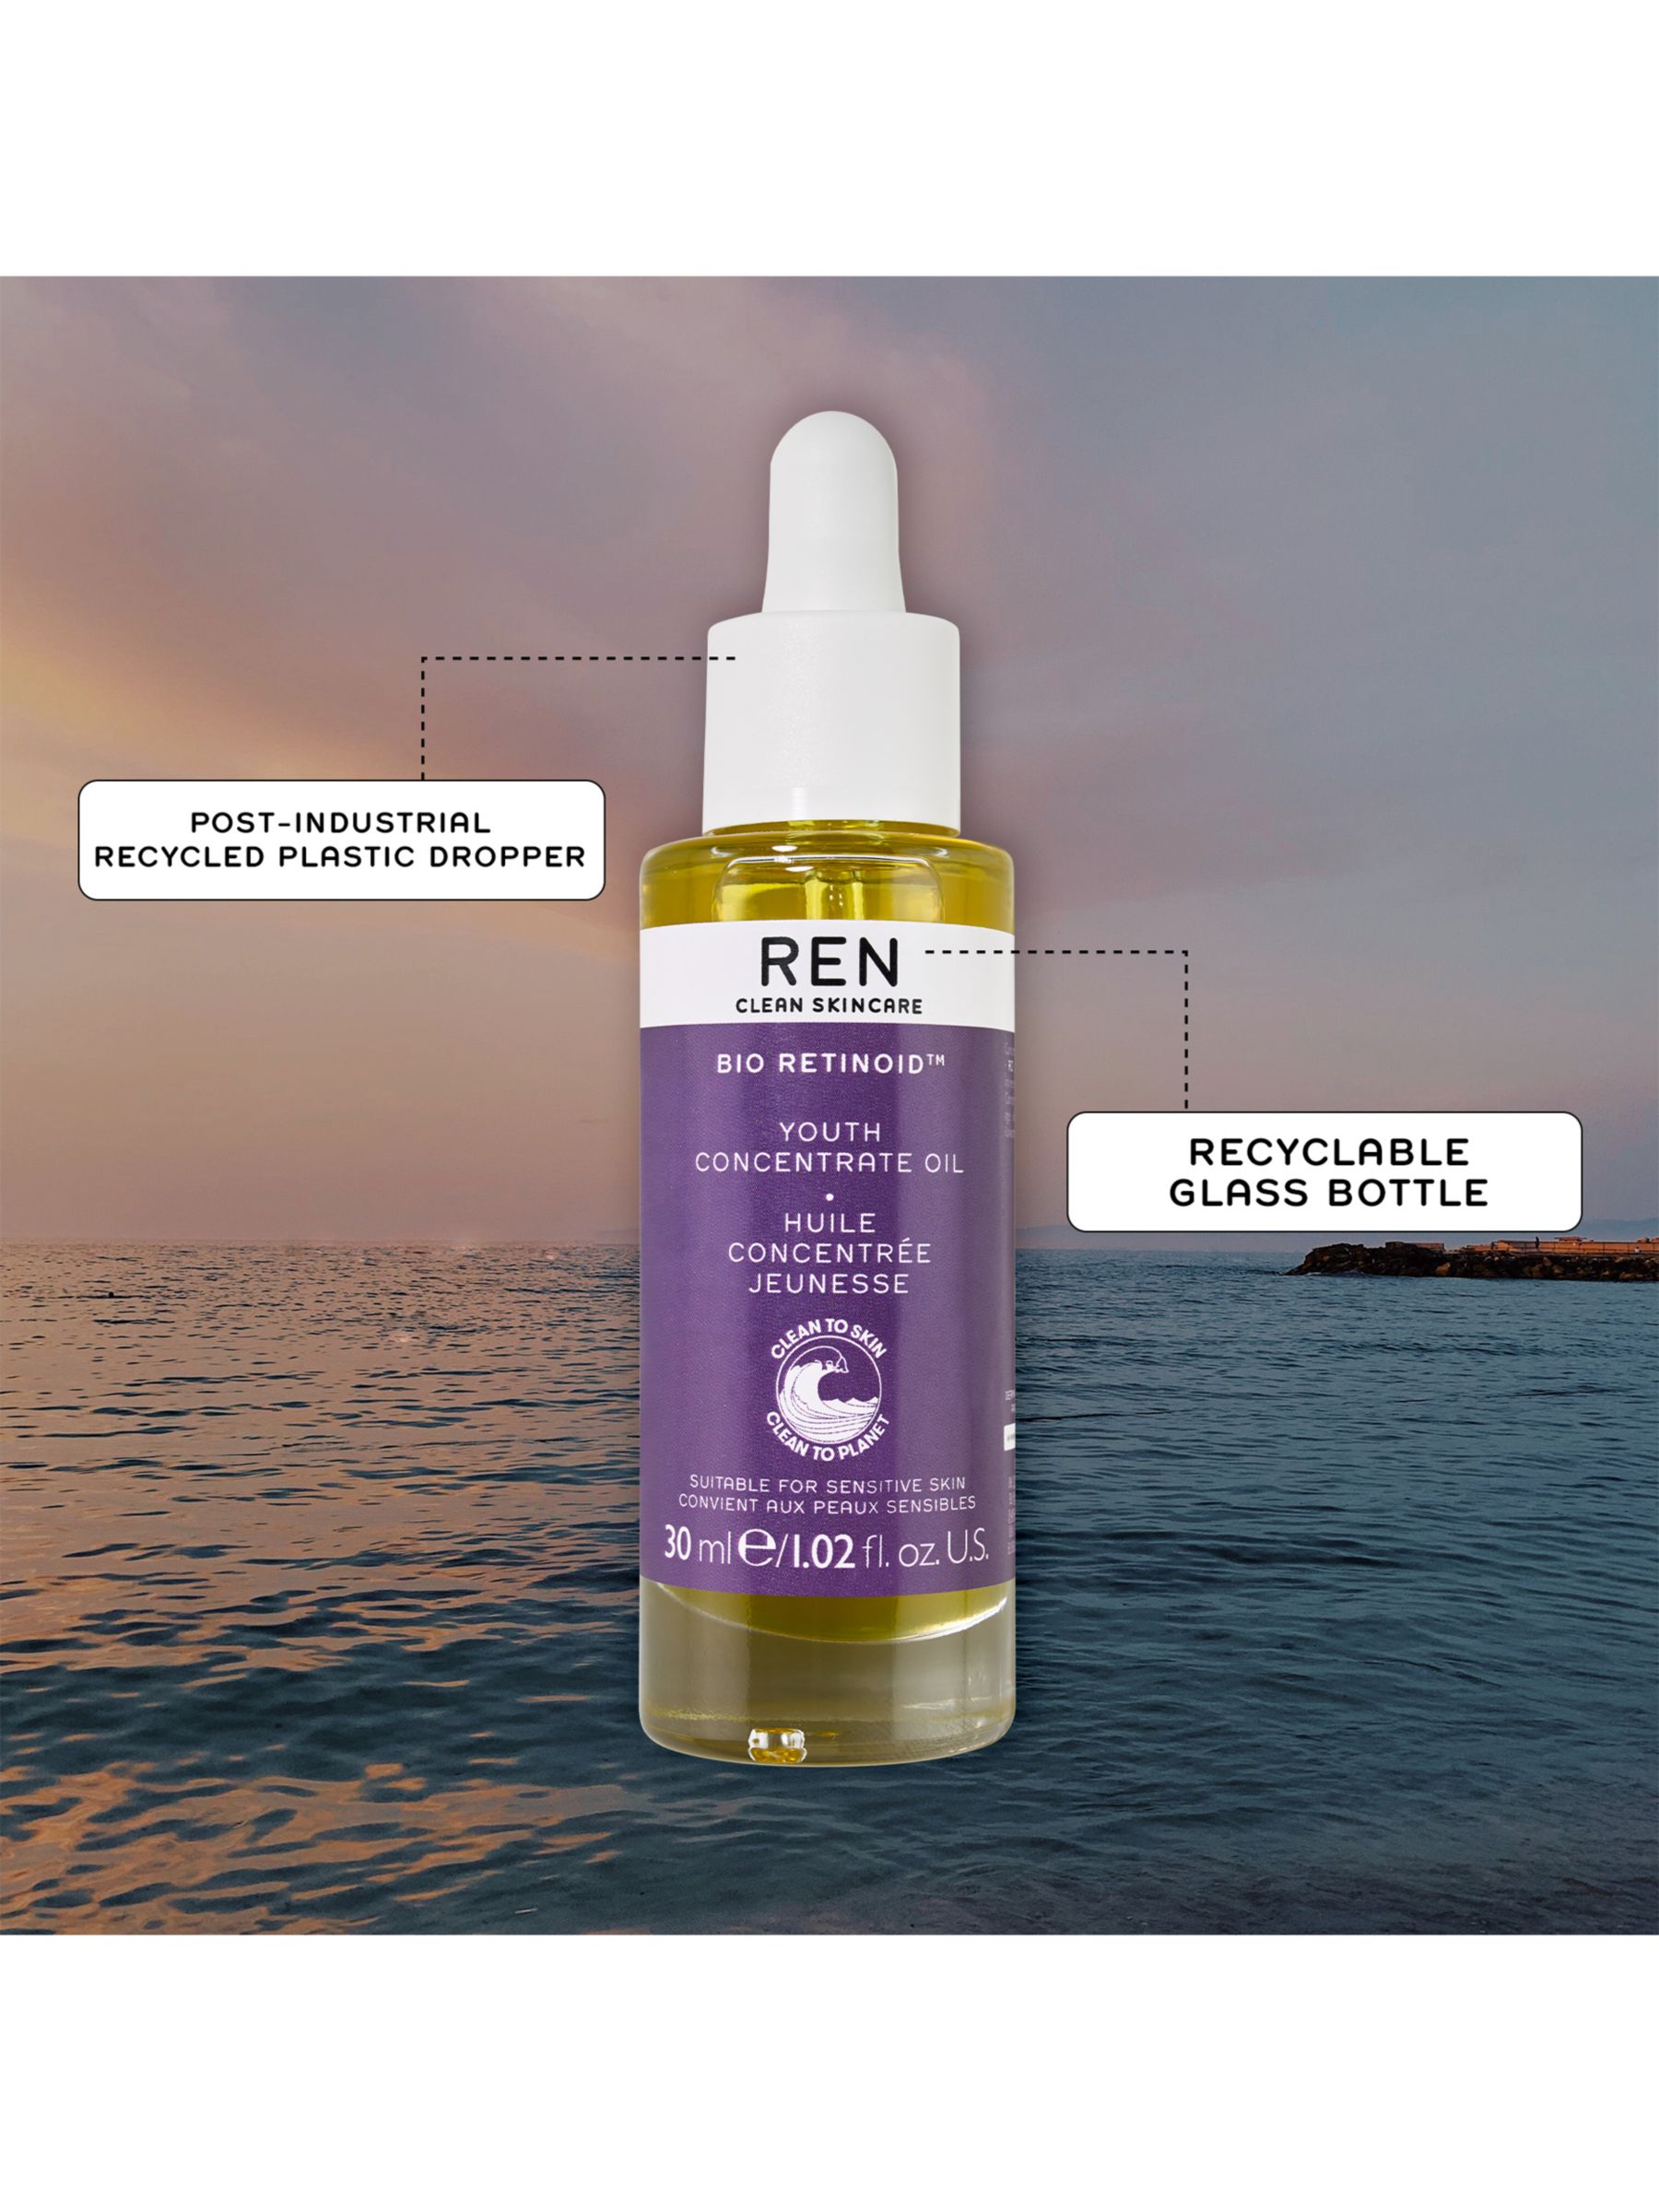 REN Clean Skincare Bio Retinoid™ Youth Concentrate Oil, 30ml 5